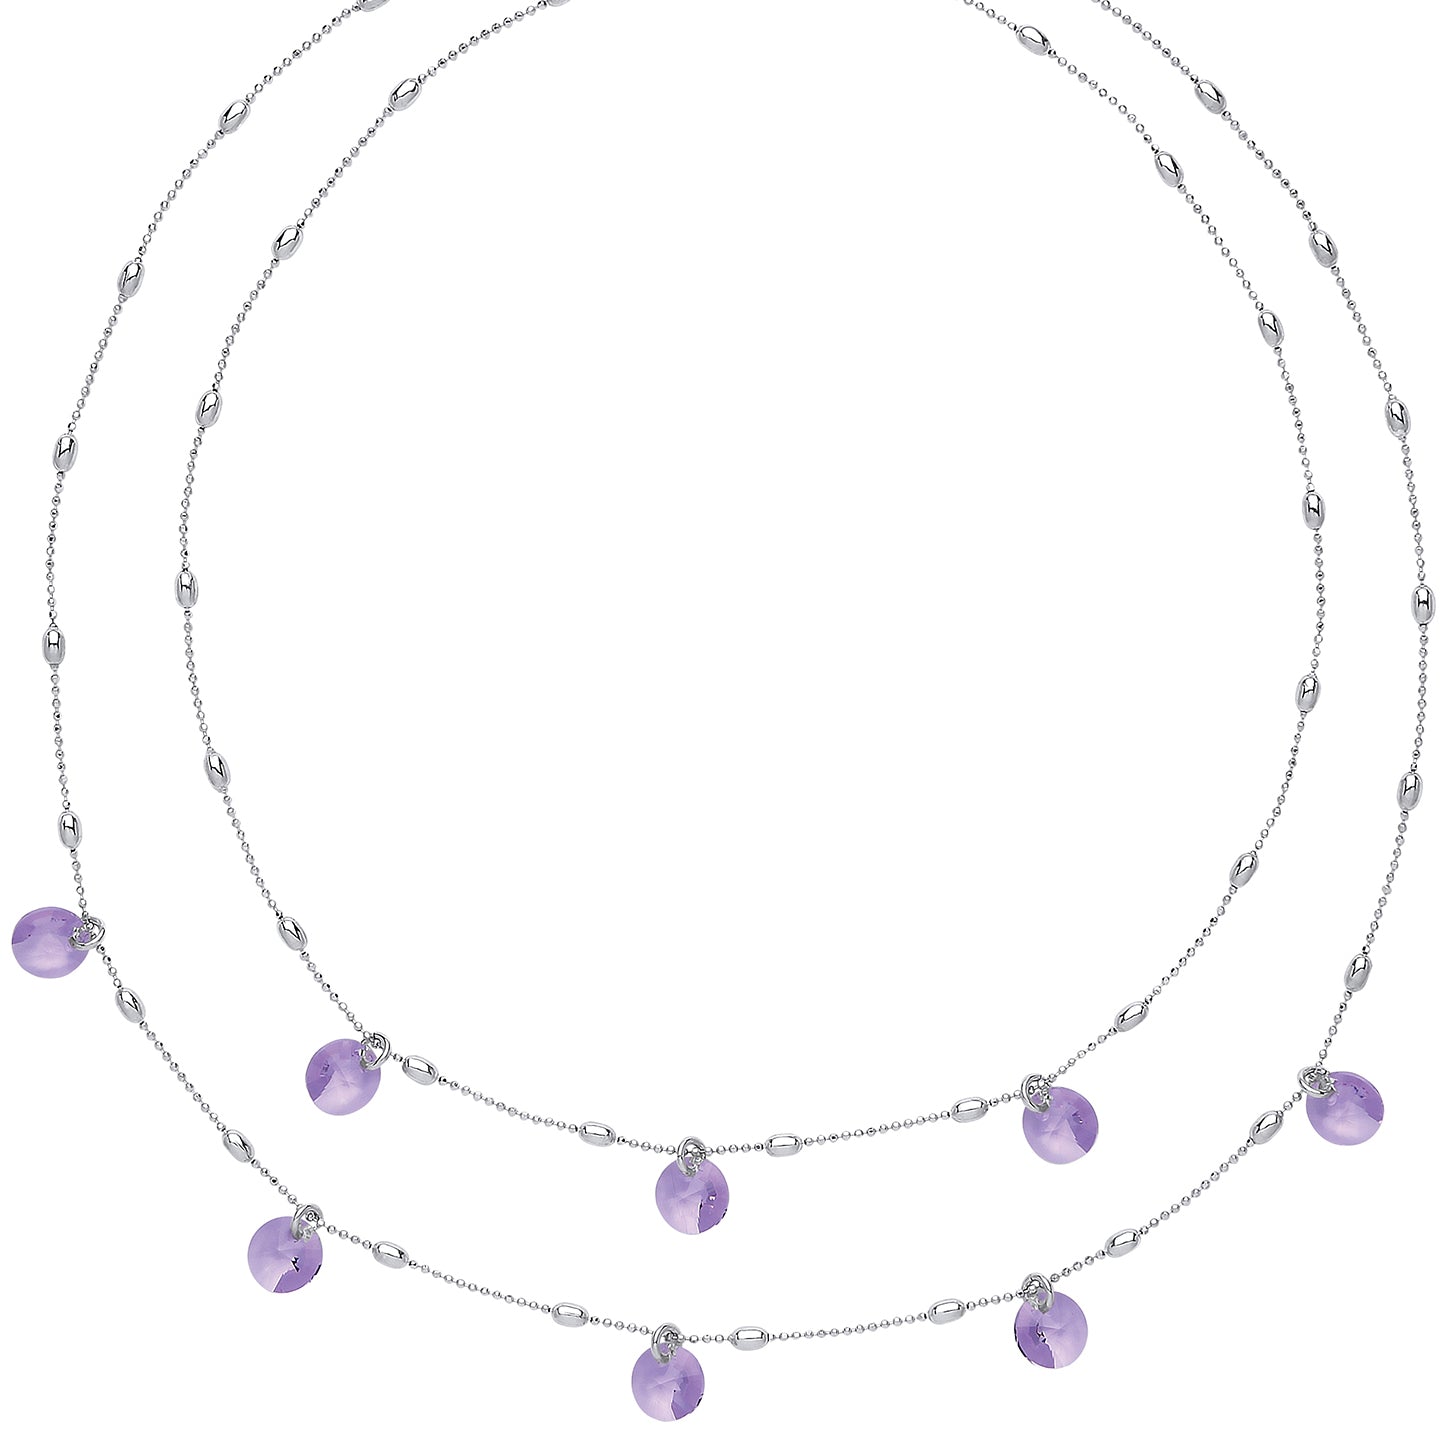 Silver  Purple Crystal String Lights Bead Necklace 15 + 2 inch - GVK188VIO